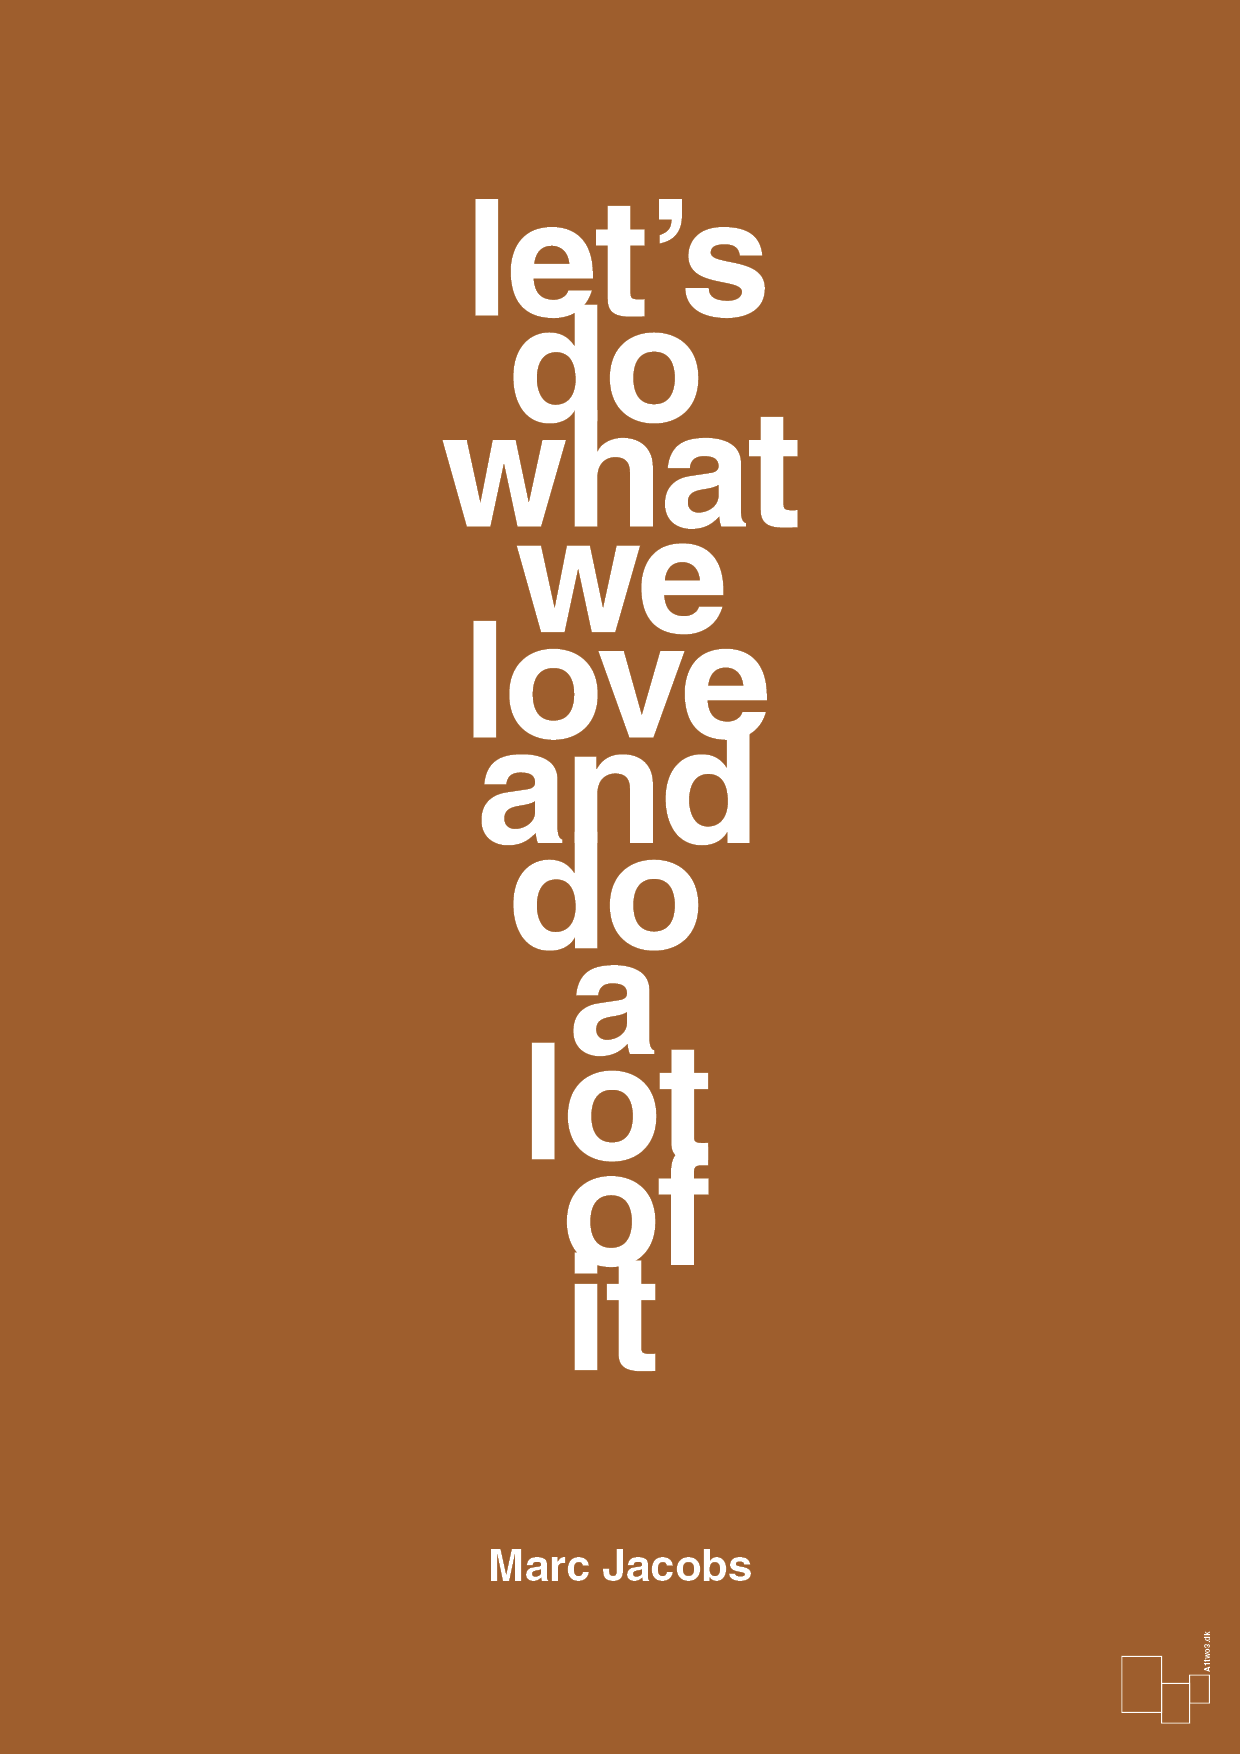 lets do what we love and do a lot of it - Plakat med Citater i Cognac